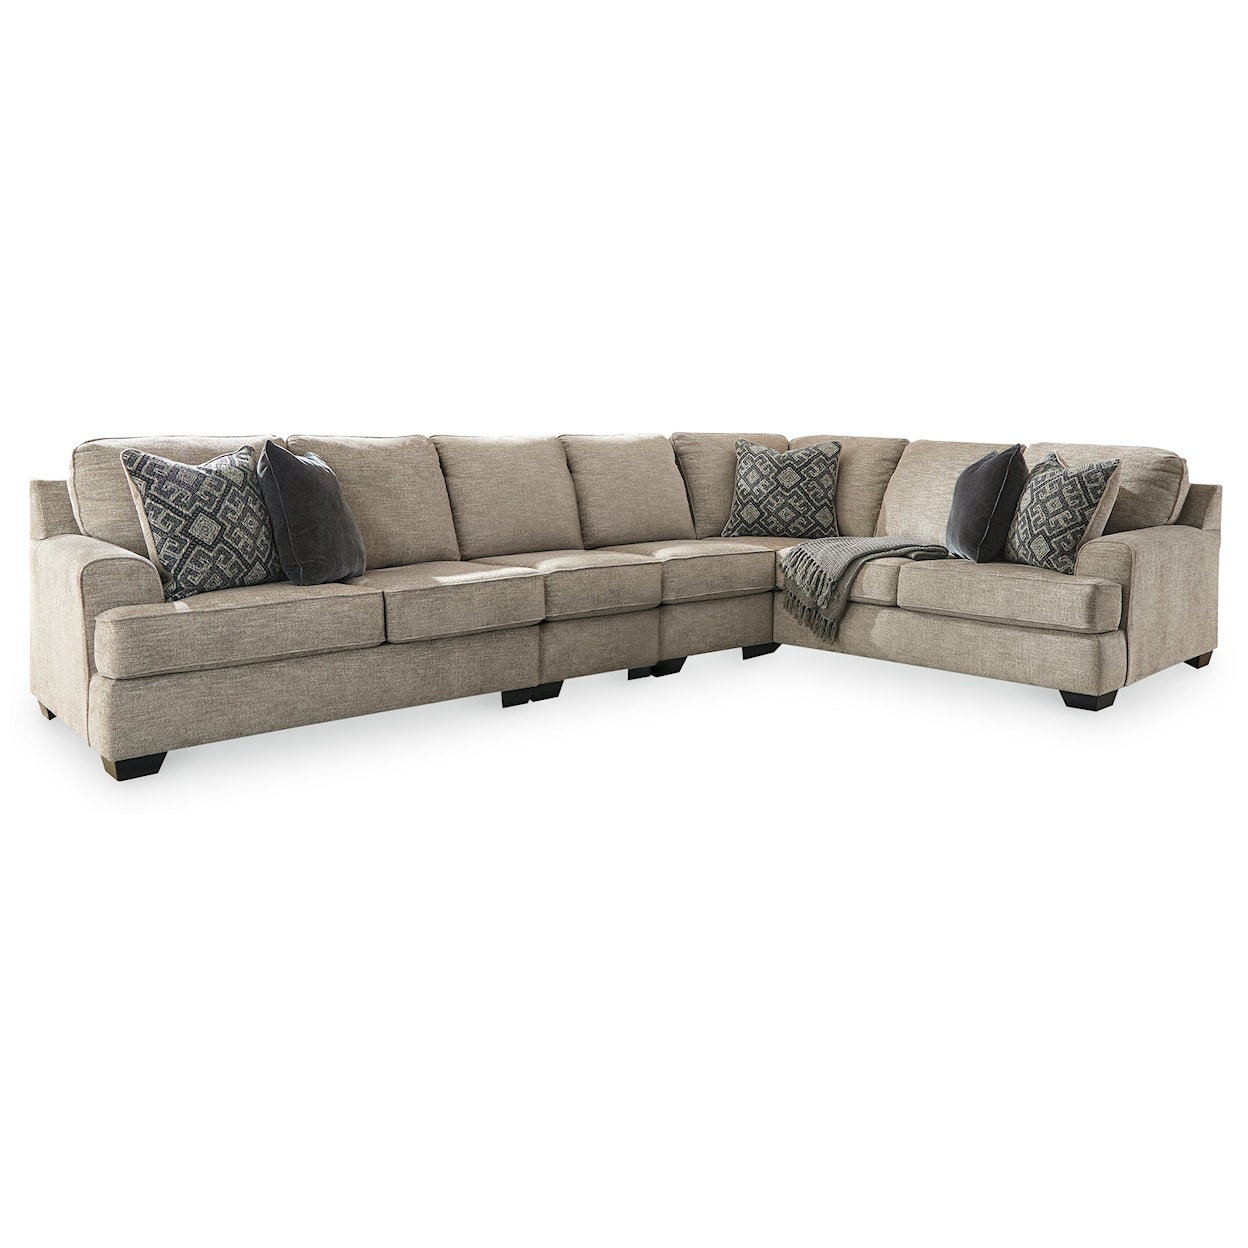 Ashley Furniture Signature Design Bovarian 4-Piece Sectional